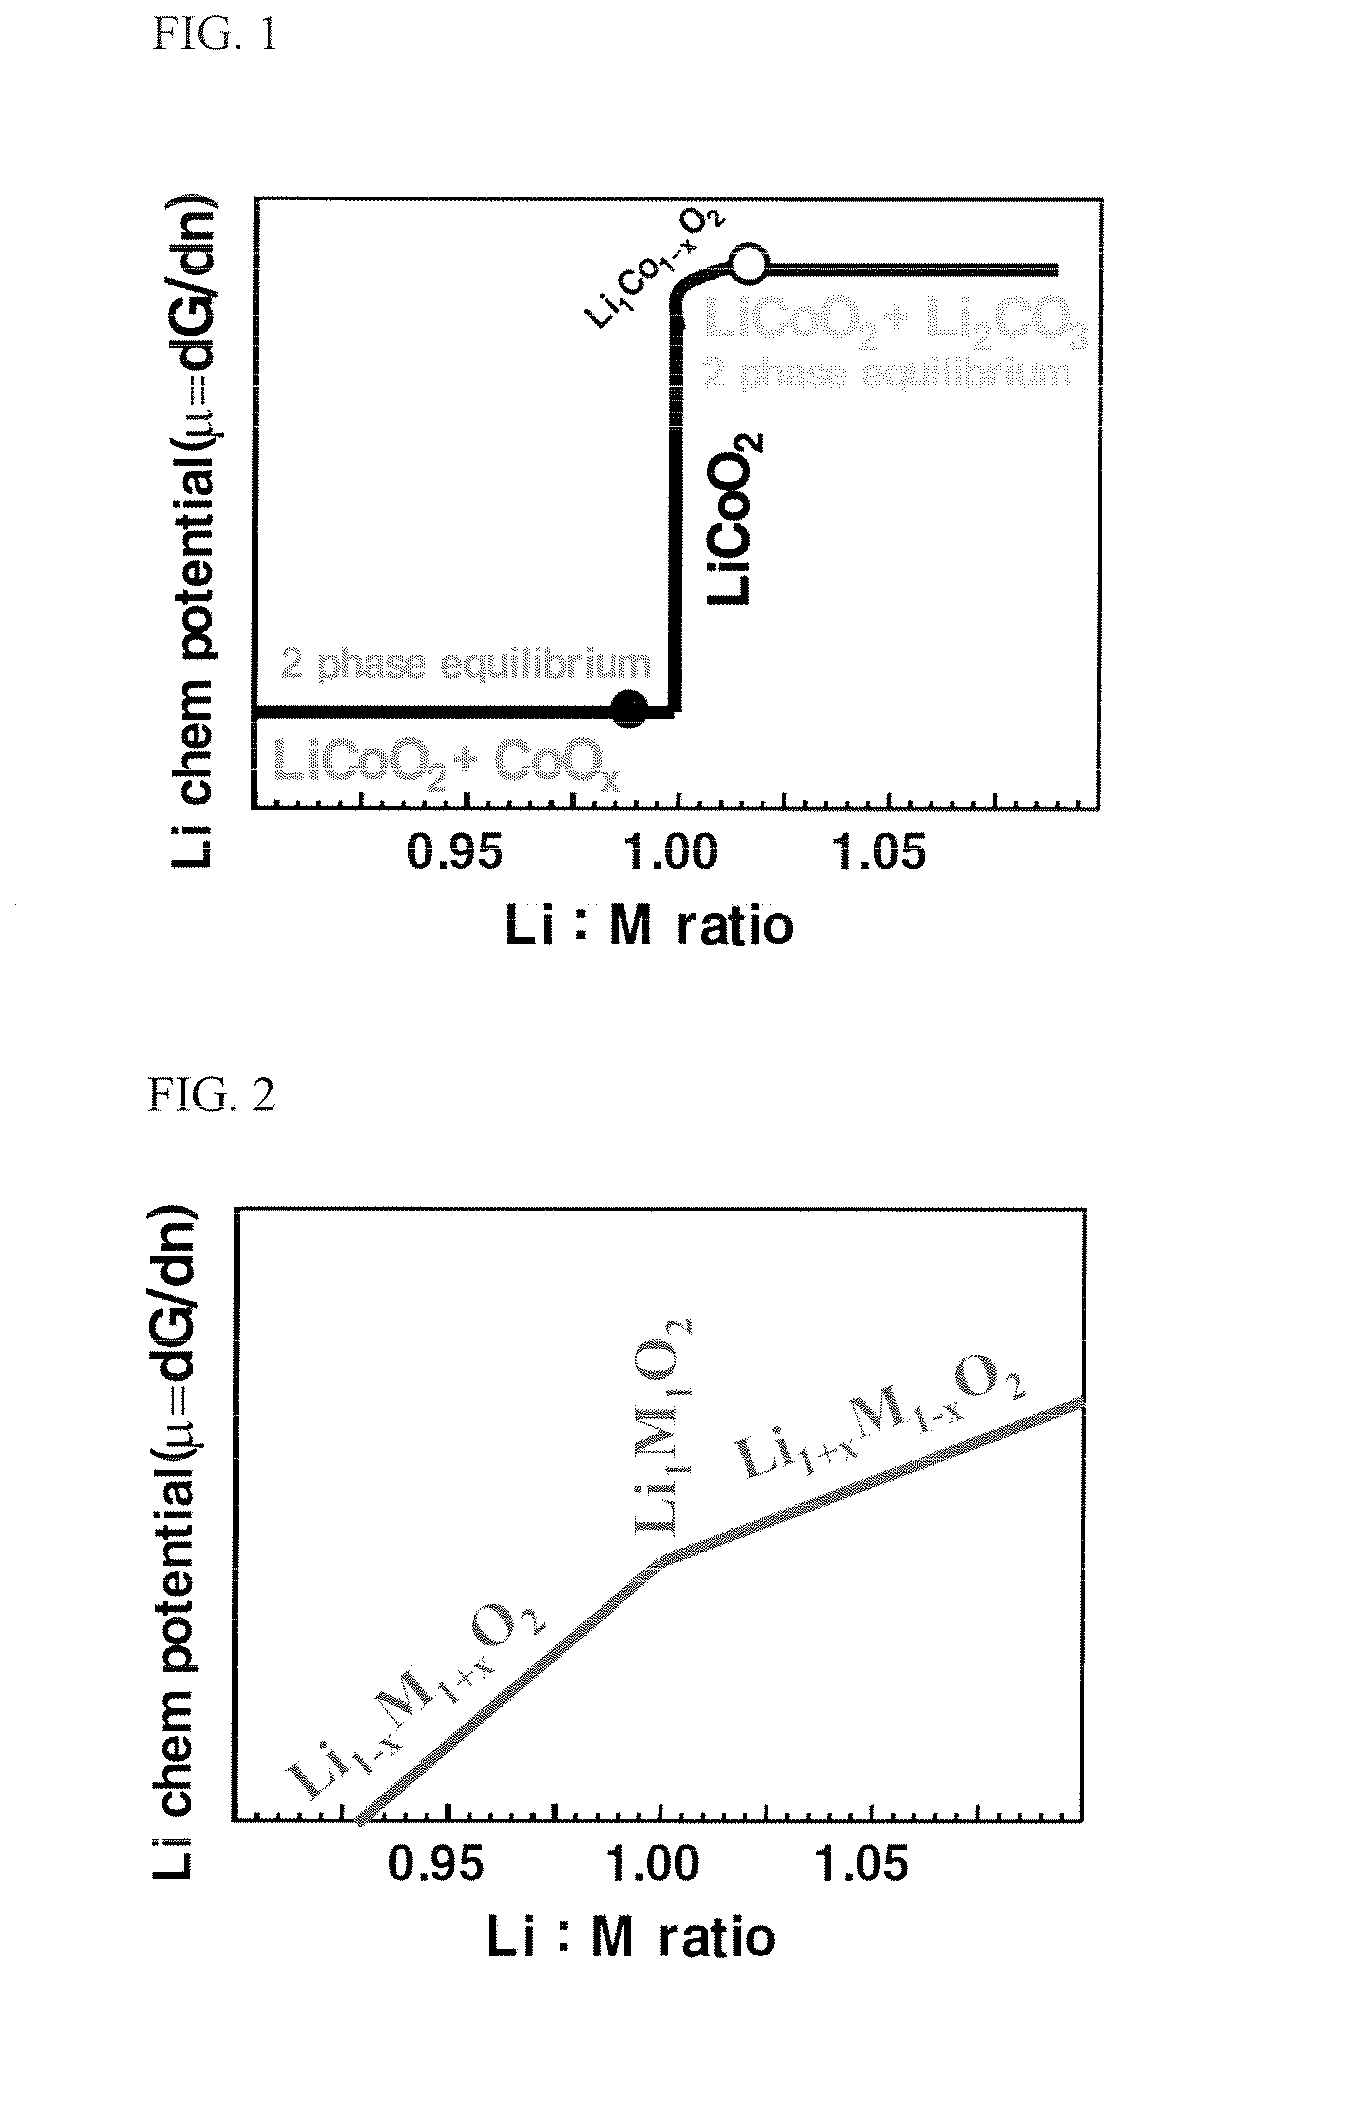 Stoichiometric Lithium Cobalt Oxide and Method for Preparation of the Same